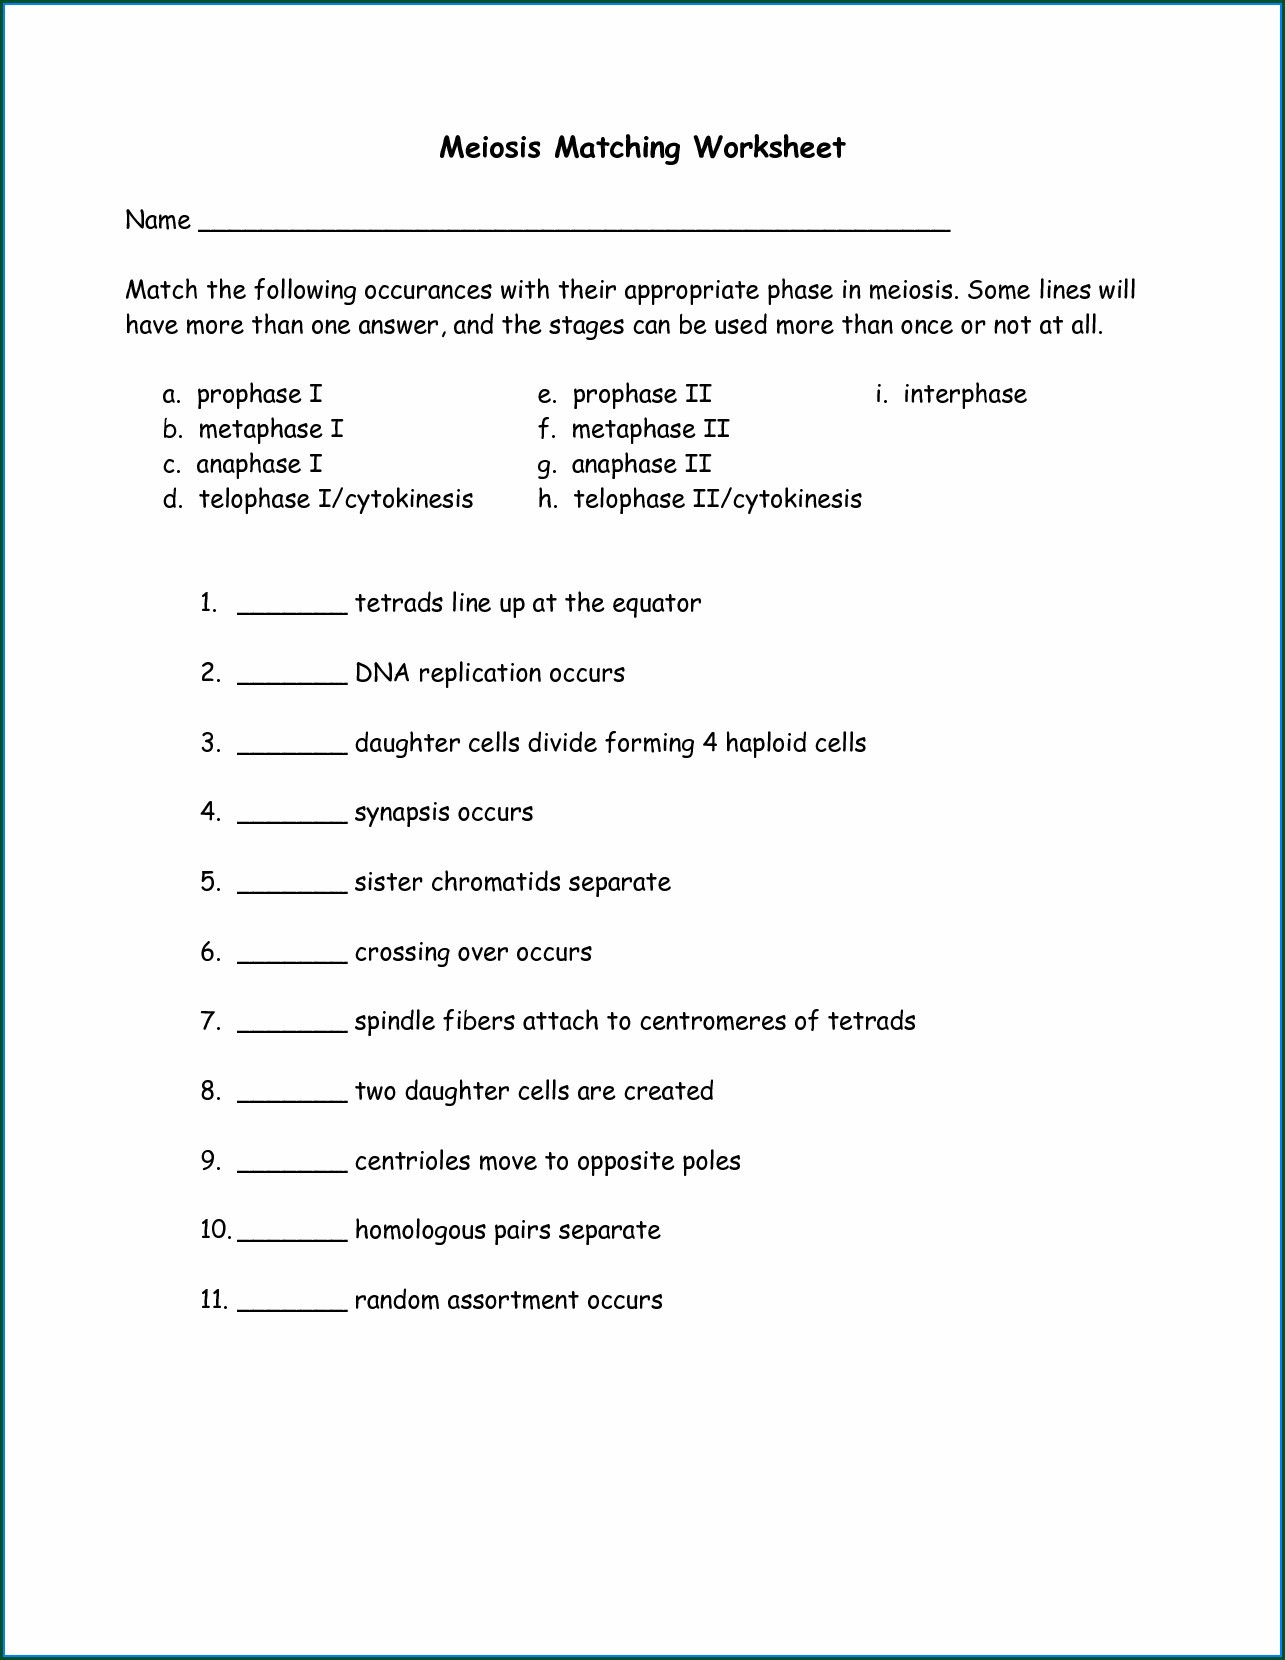 Meiosis Matching Worksheet Answer Key Cells Alive Cell Cycle Worksheet